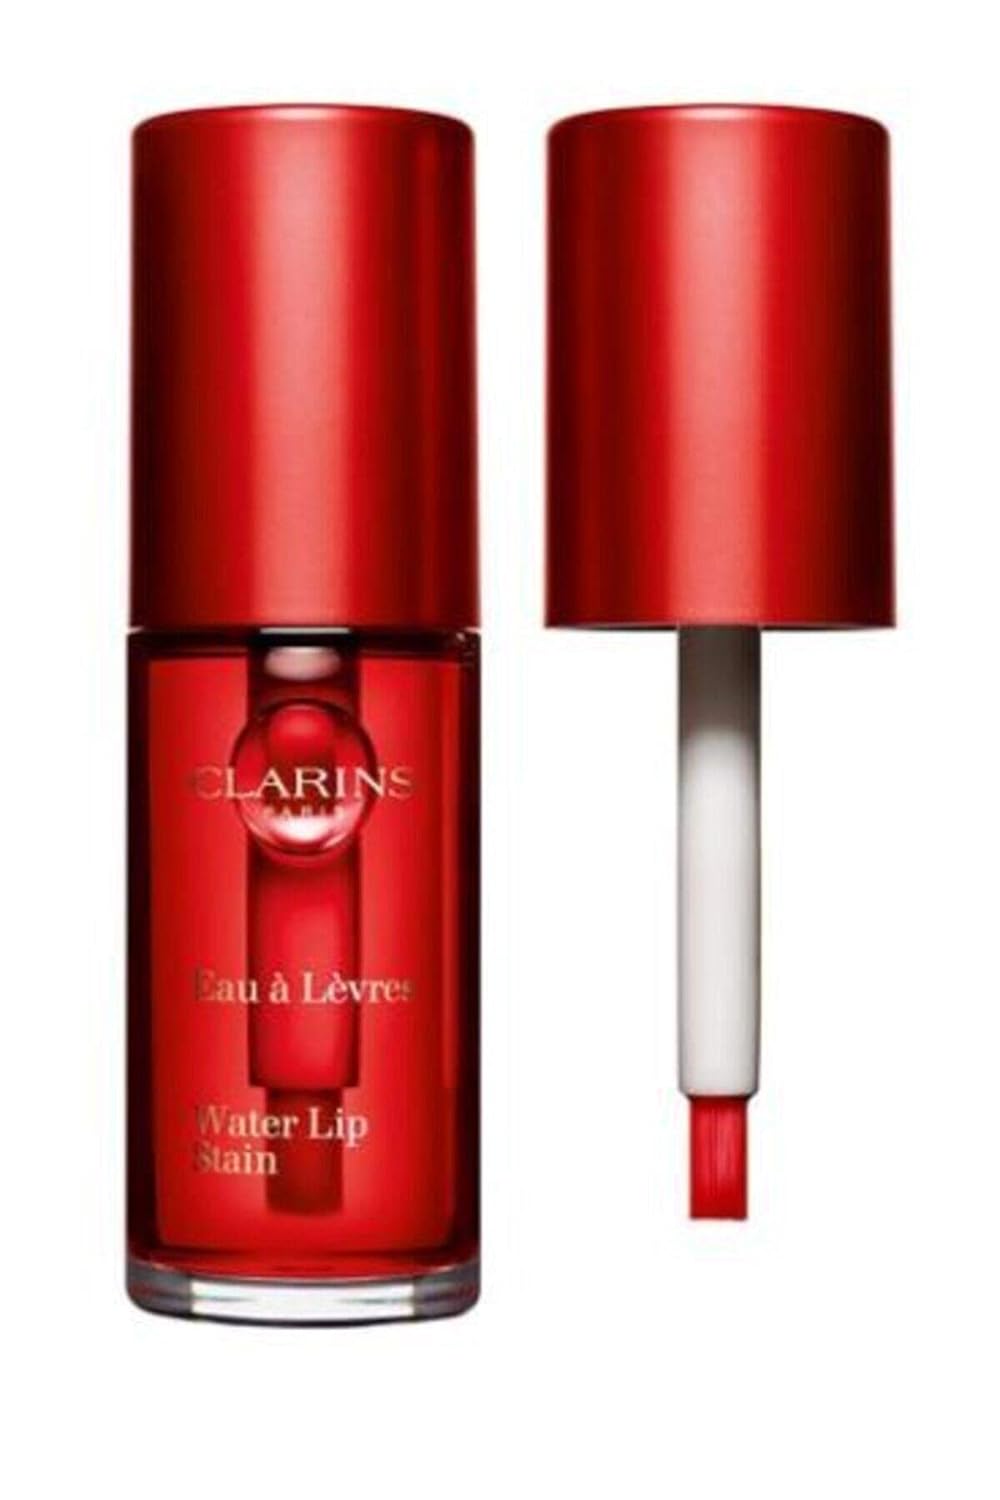 Clarins Water Lip Stain | Matte Finish | Moisturizing and Softening | Buildable, Transfer-Proof, Mask-Proof, Lightweight and Long-Wearing